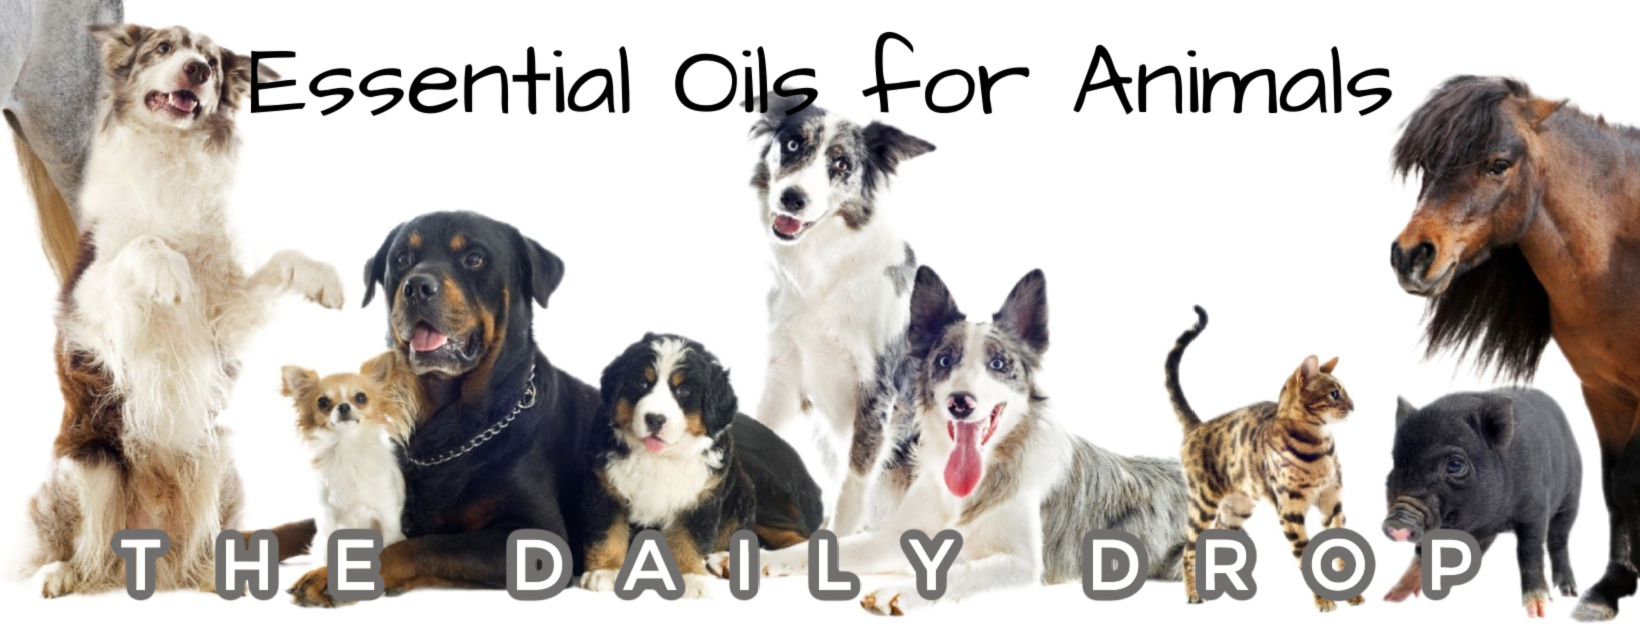 Essential Oils for Animals | From Sandy